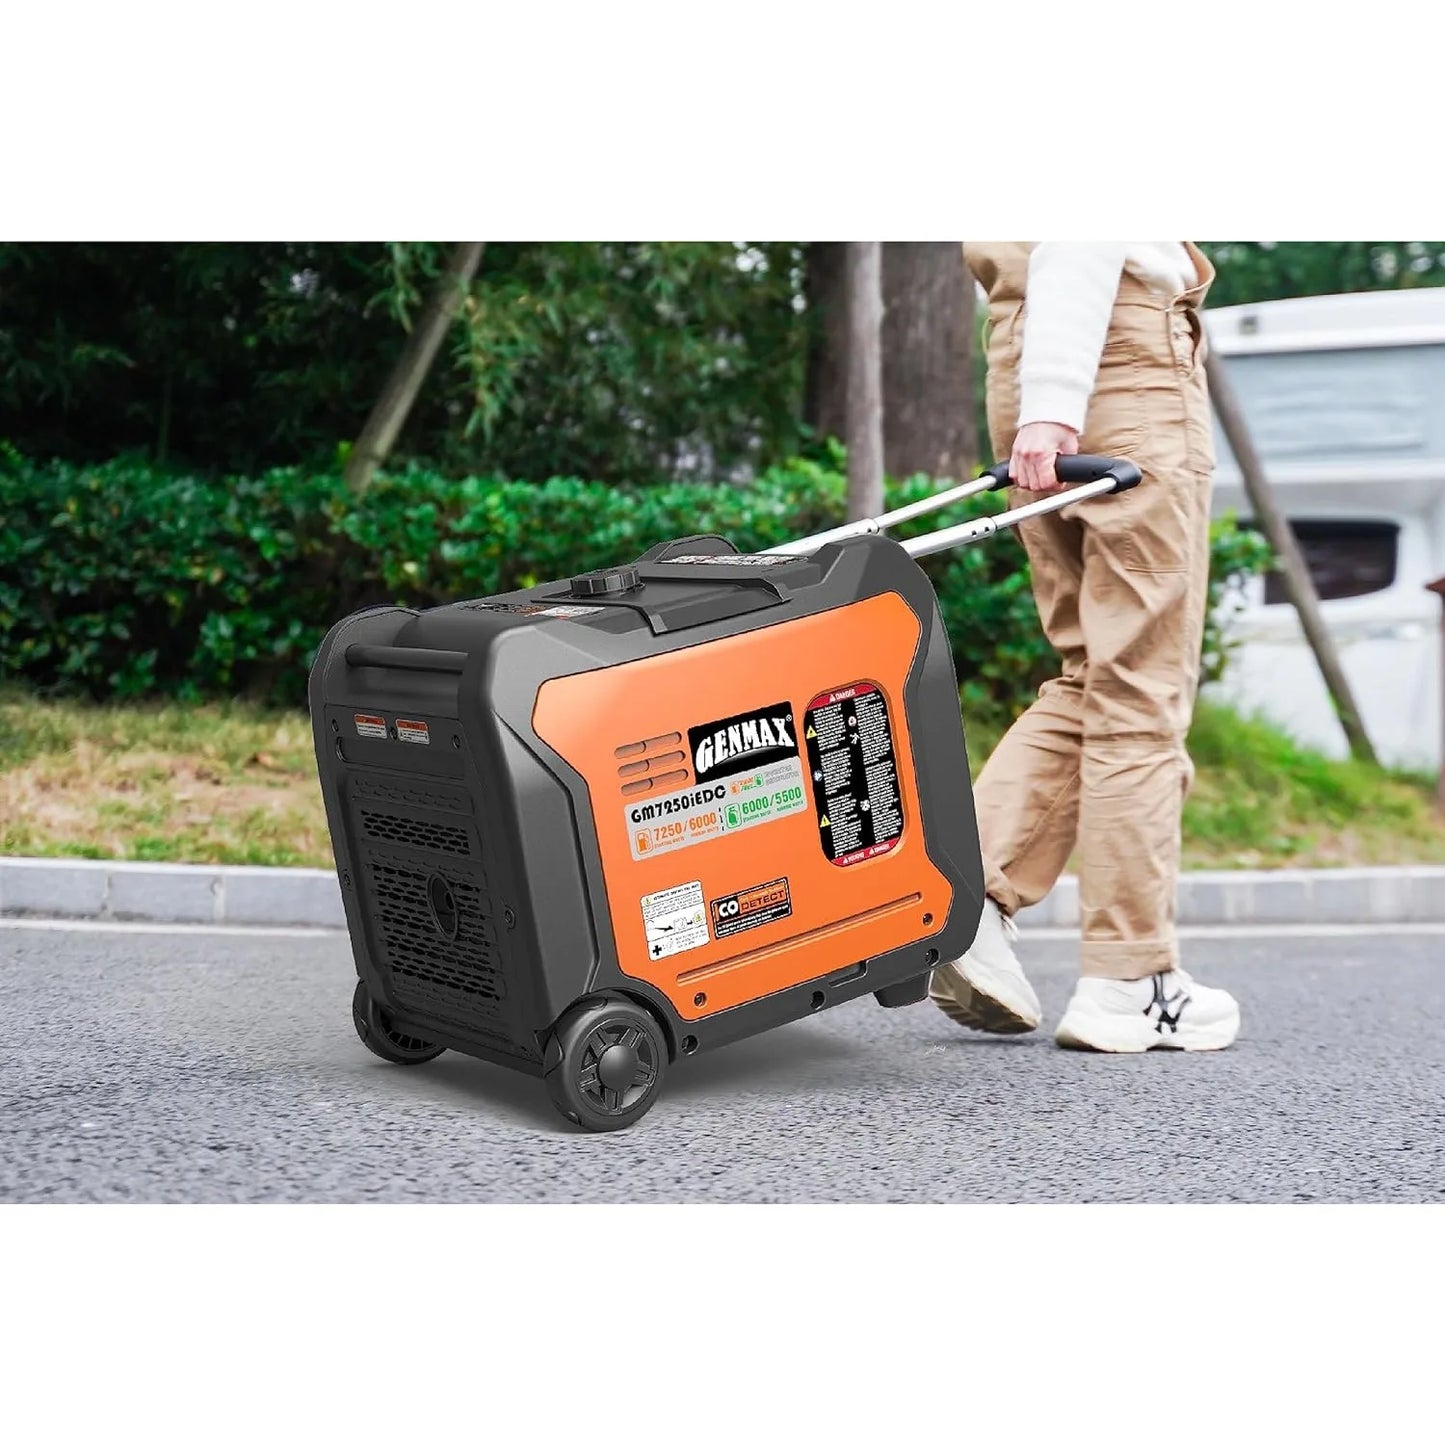 Portable Inverter Generator, 7250W Quiet Dual Fuel Portable Engine w/ Parallel Capability, Remote/Electric Start